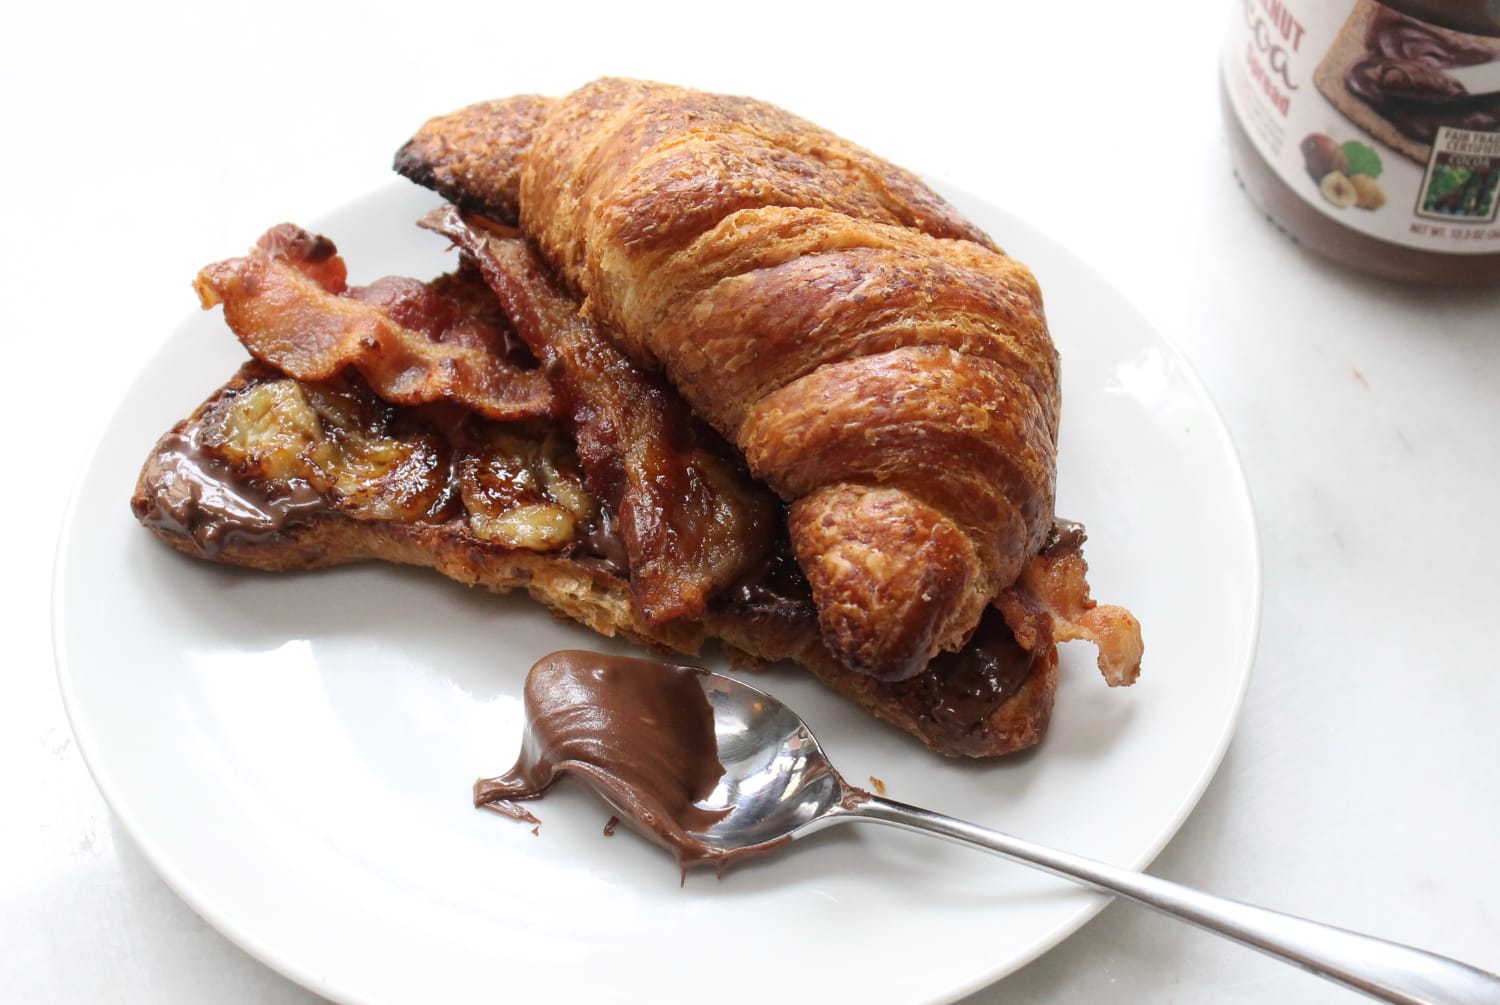 Croissant with Nutella